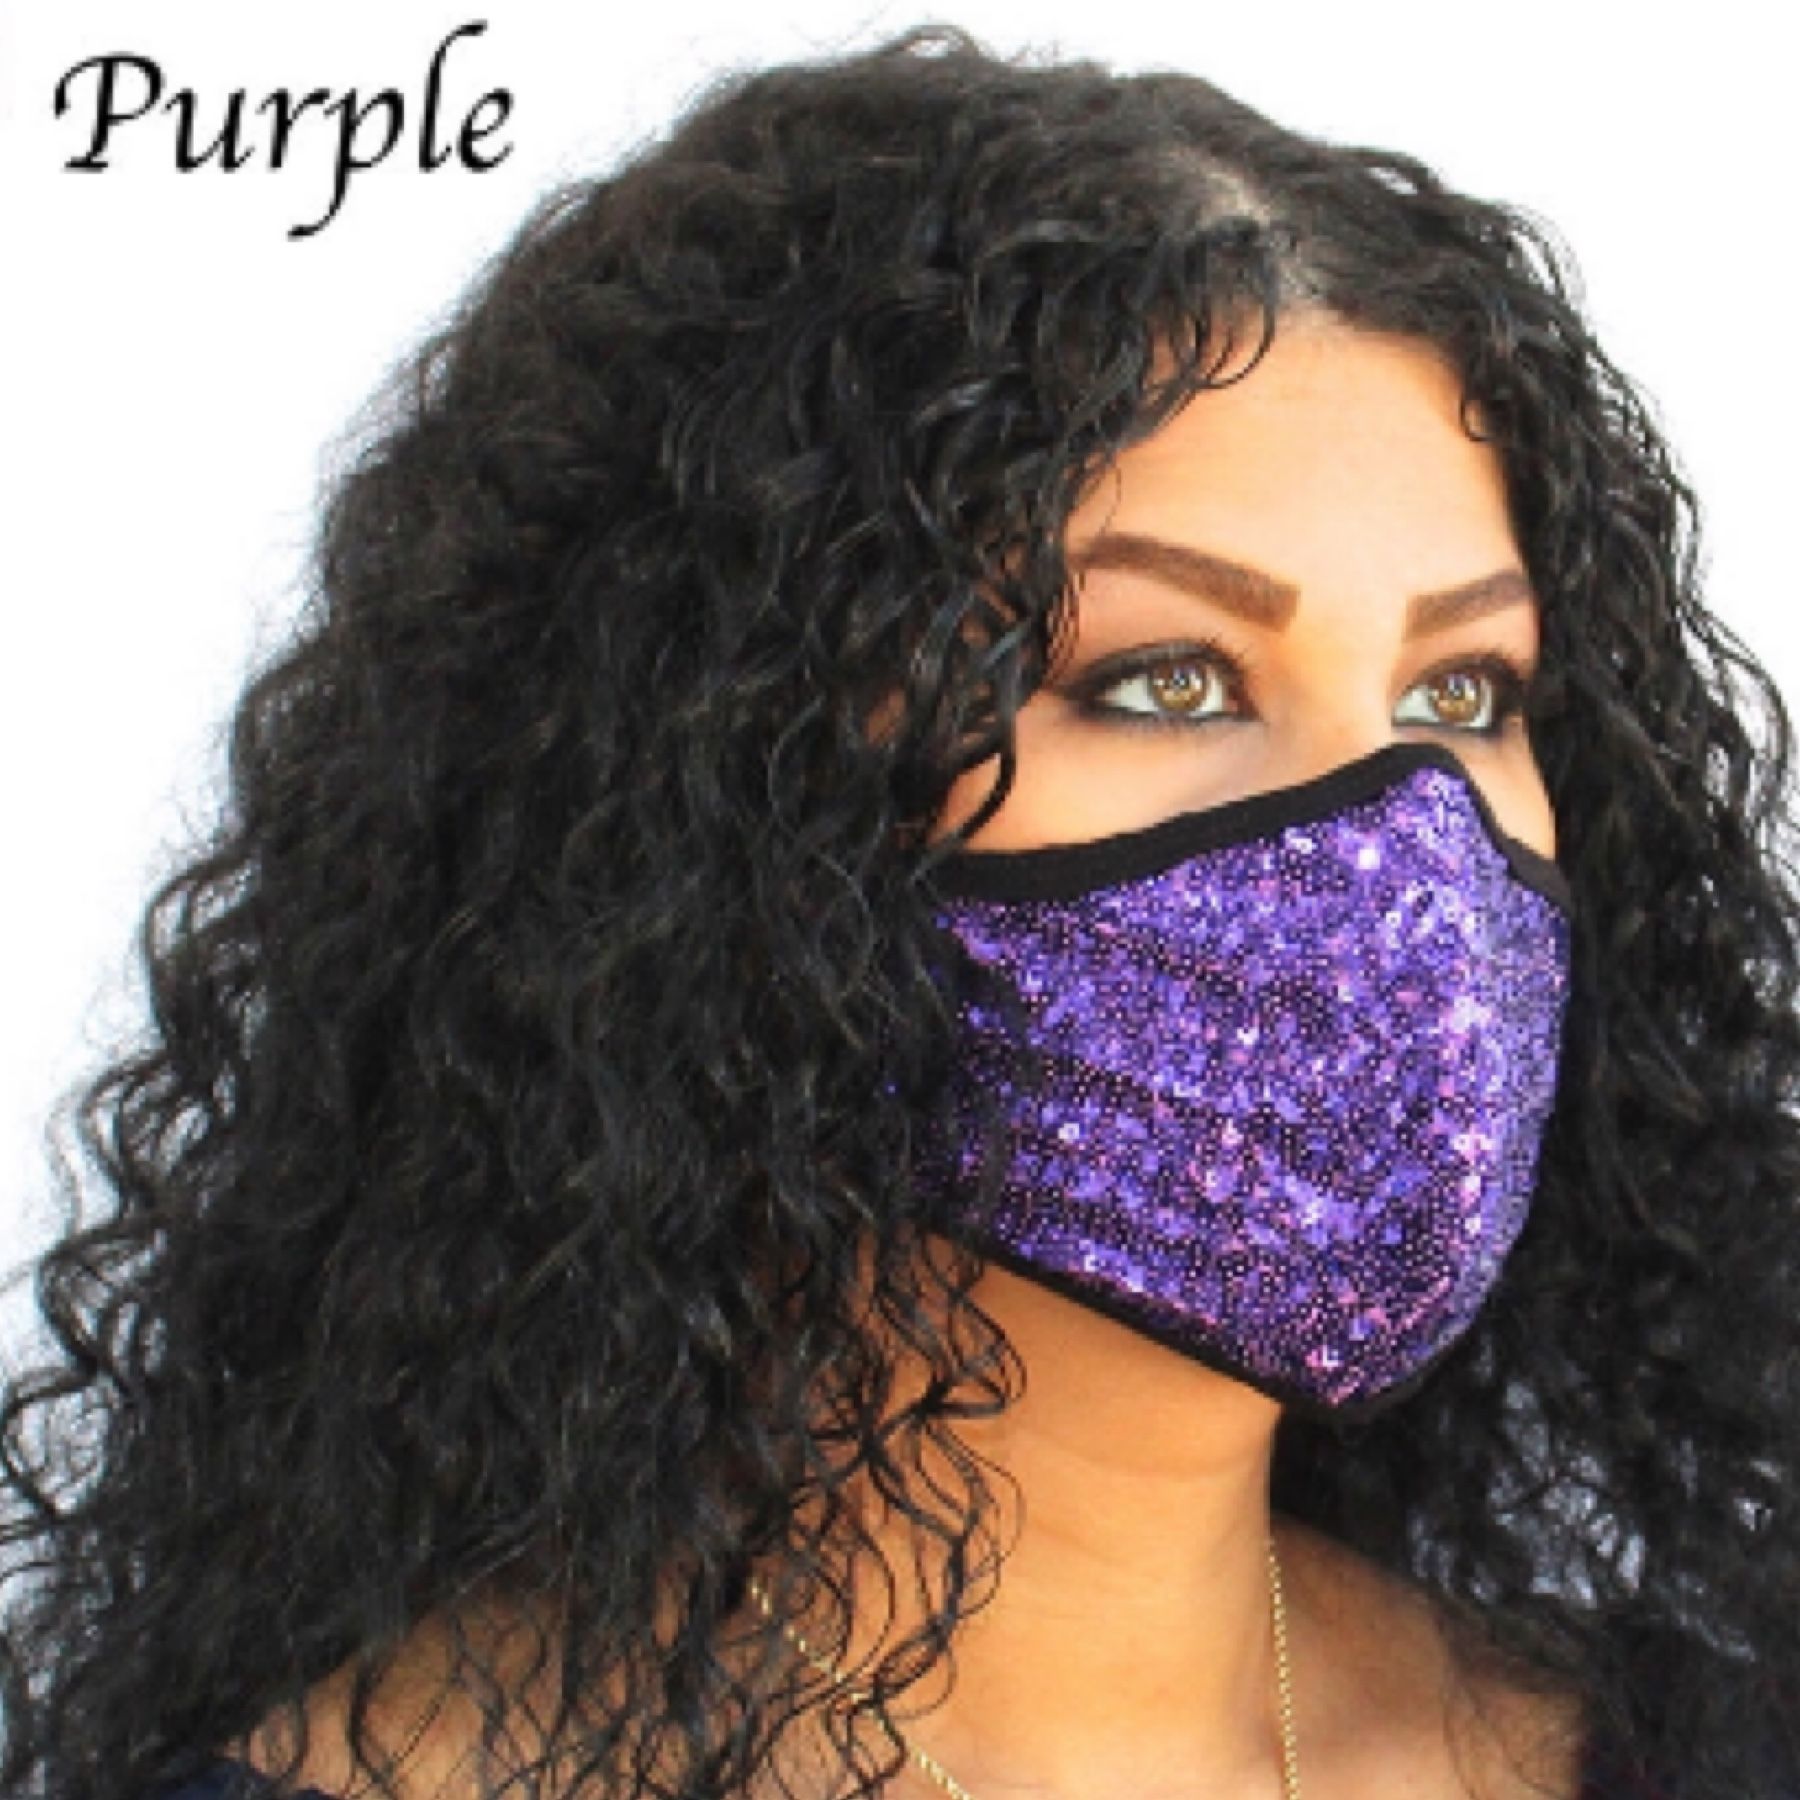 Purple washable face mask made in USA 🇺🇸